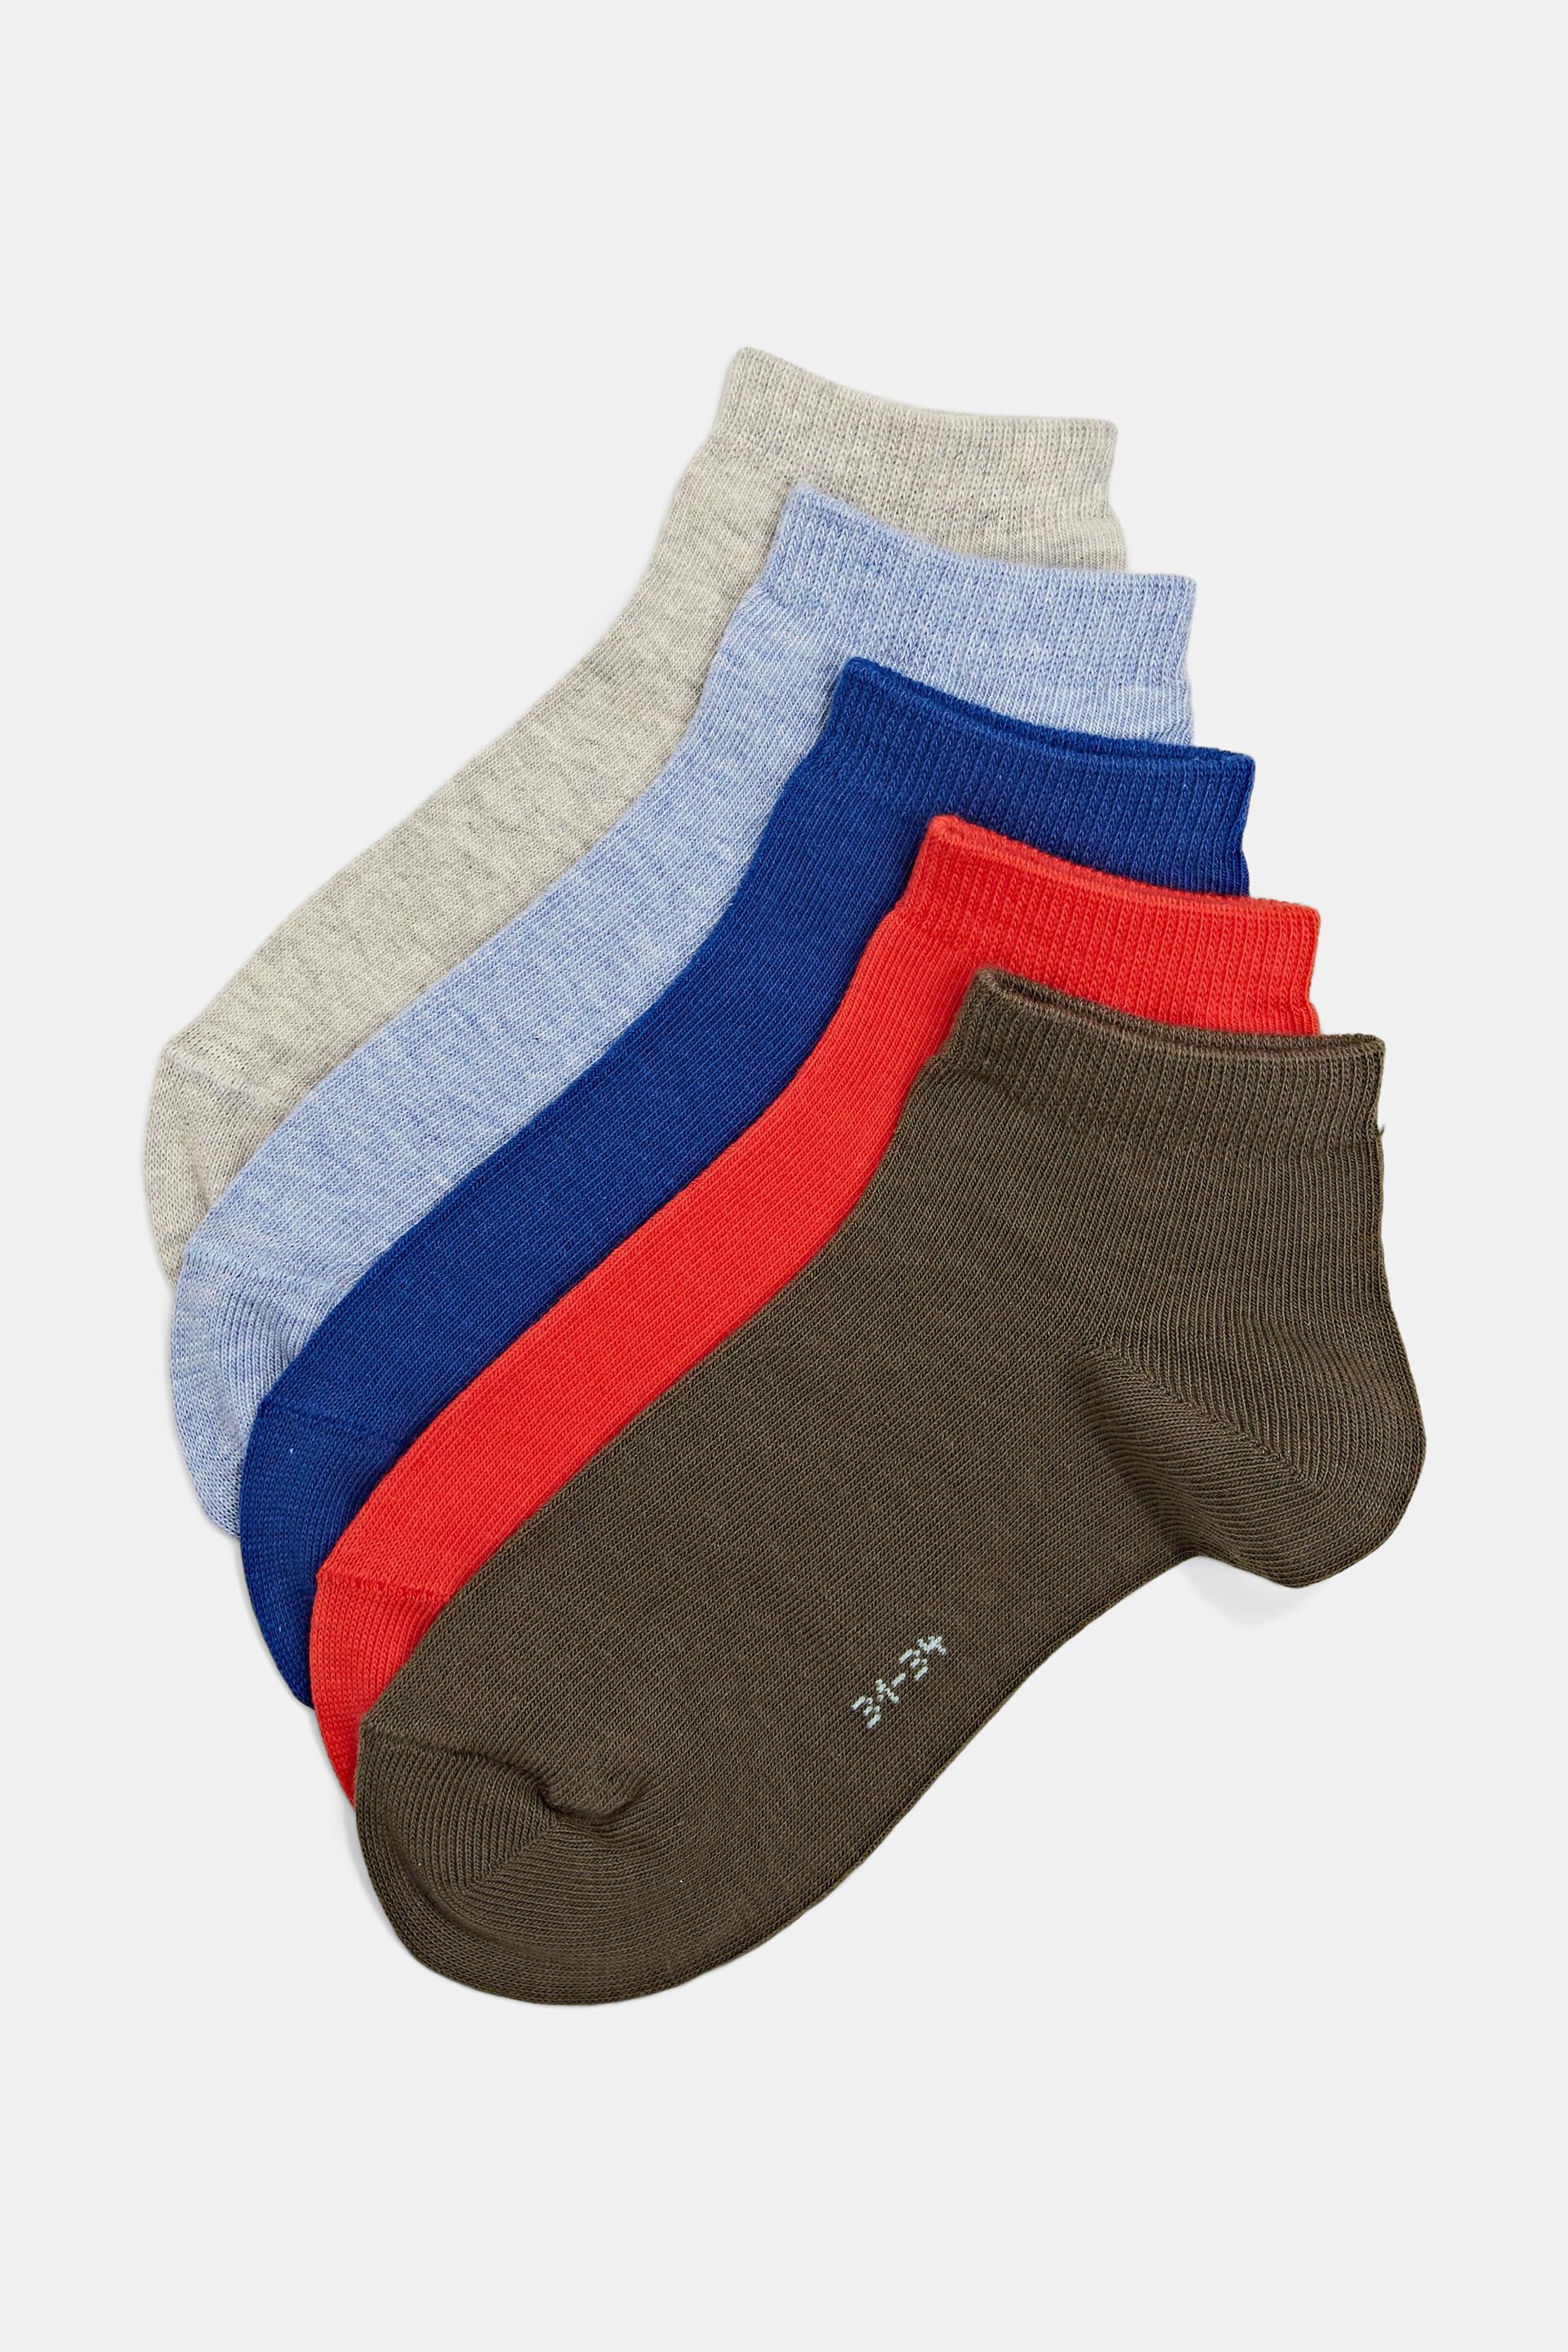 Edc By Esprit Pack of 5 pairs of plain-coloured socks, in an organic cotton blend